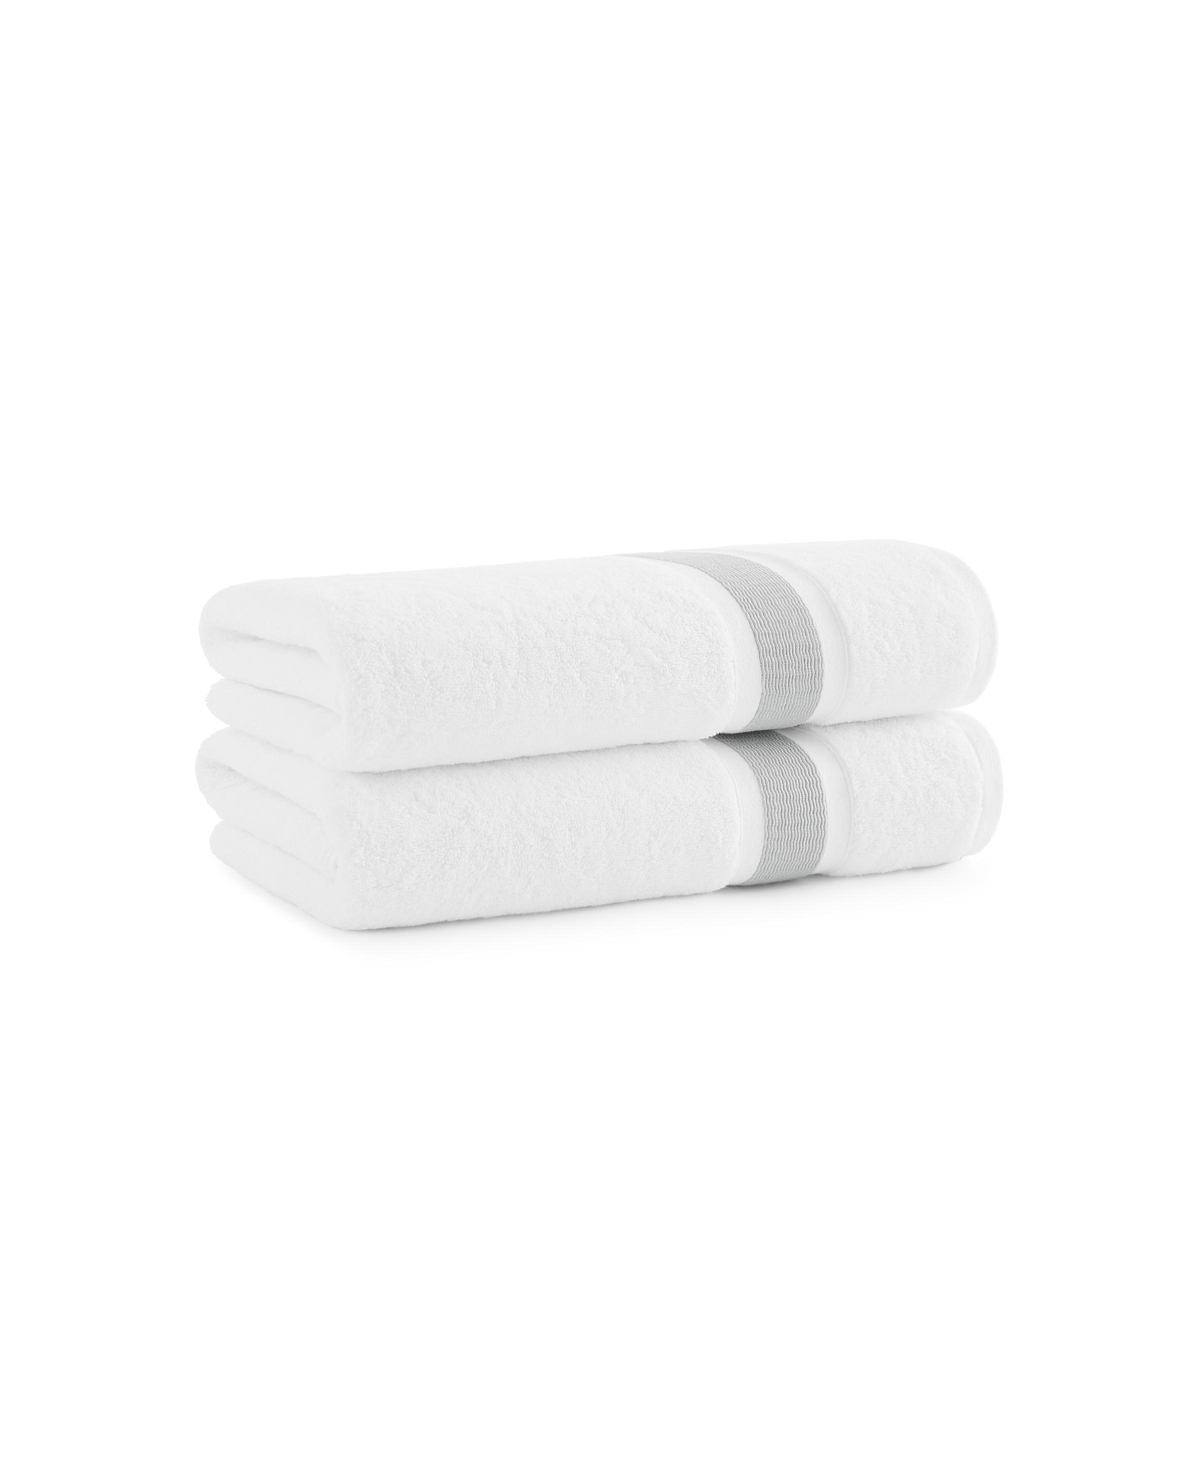 ASTON AND ARDEN AEGEAN ECO-FRIENDLY RECYCLED TURKISH BATH TOWELS (2 PACK), 30X60, 600 GSM, WHITE WITH WEFT WOVEN STR